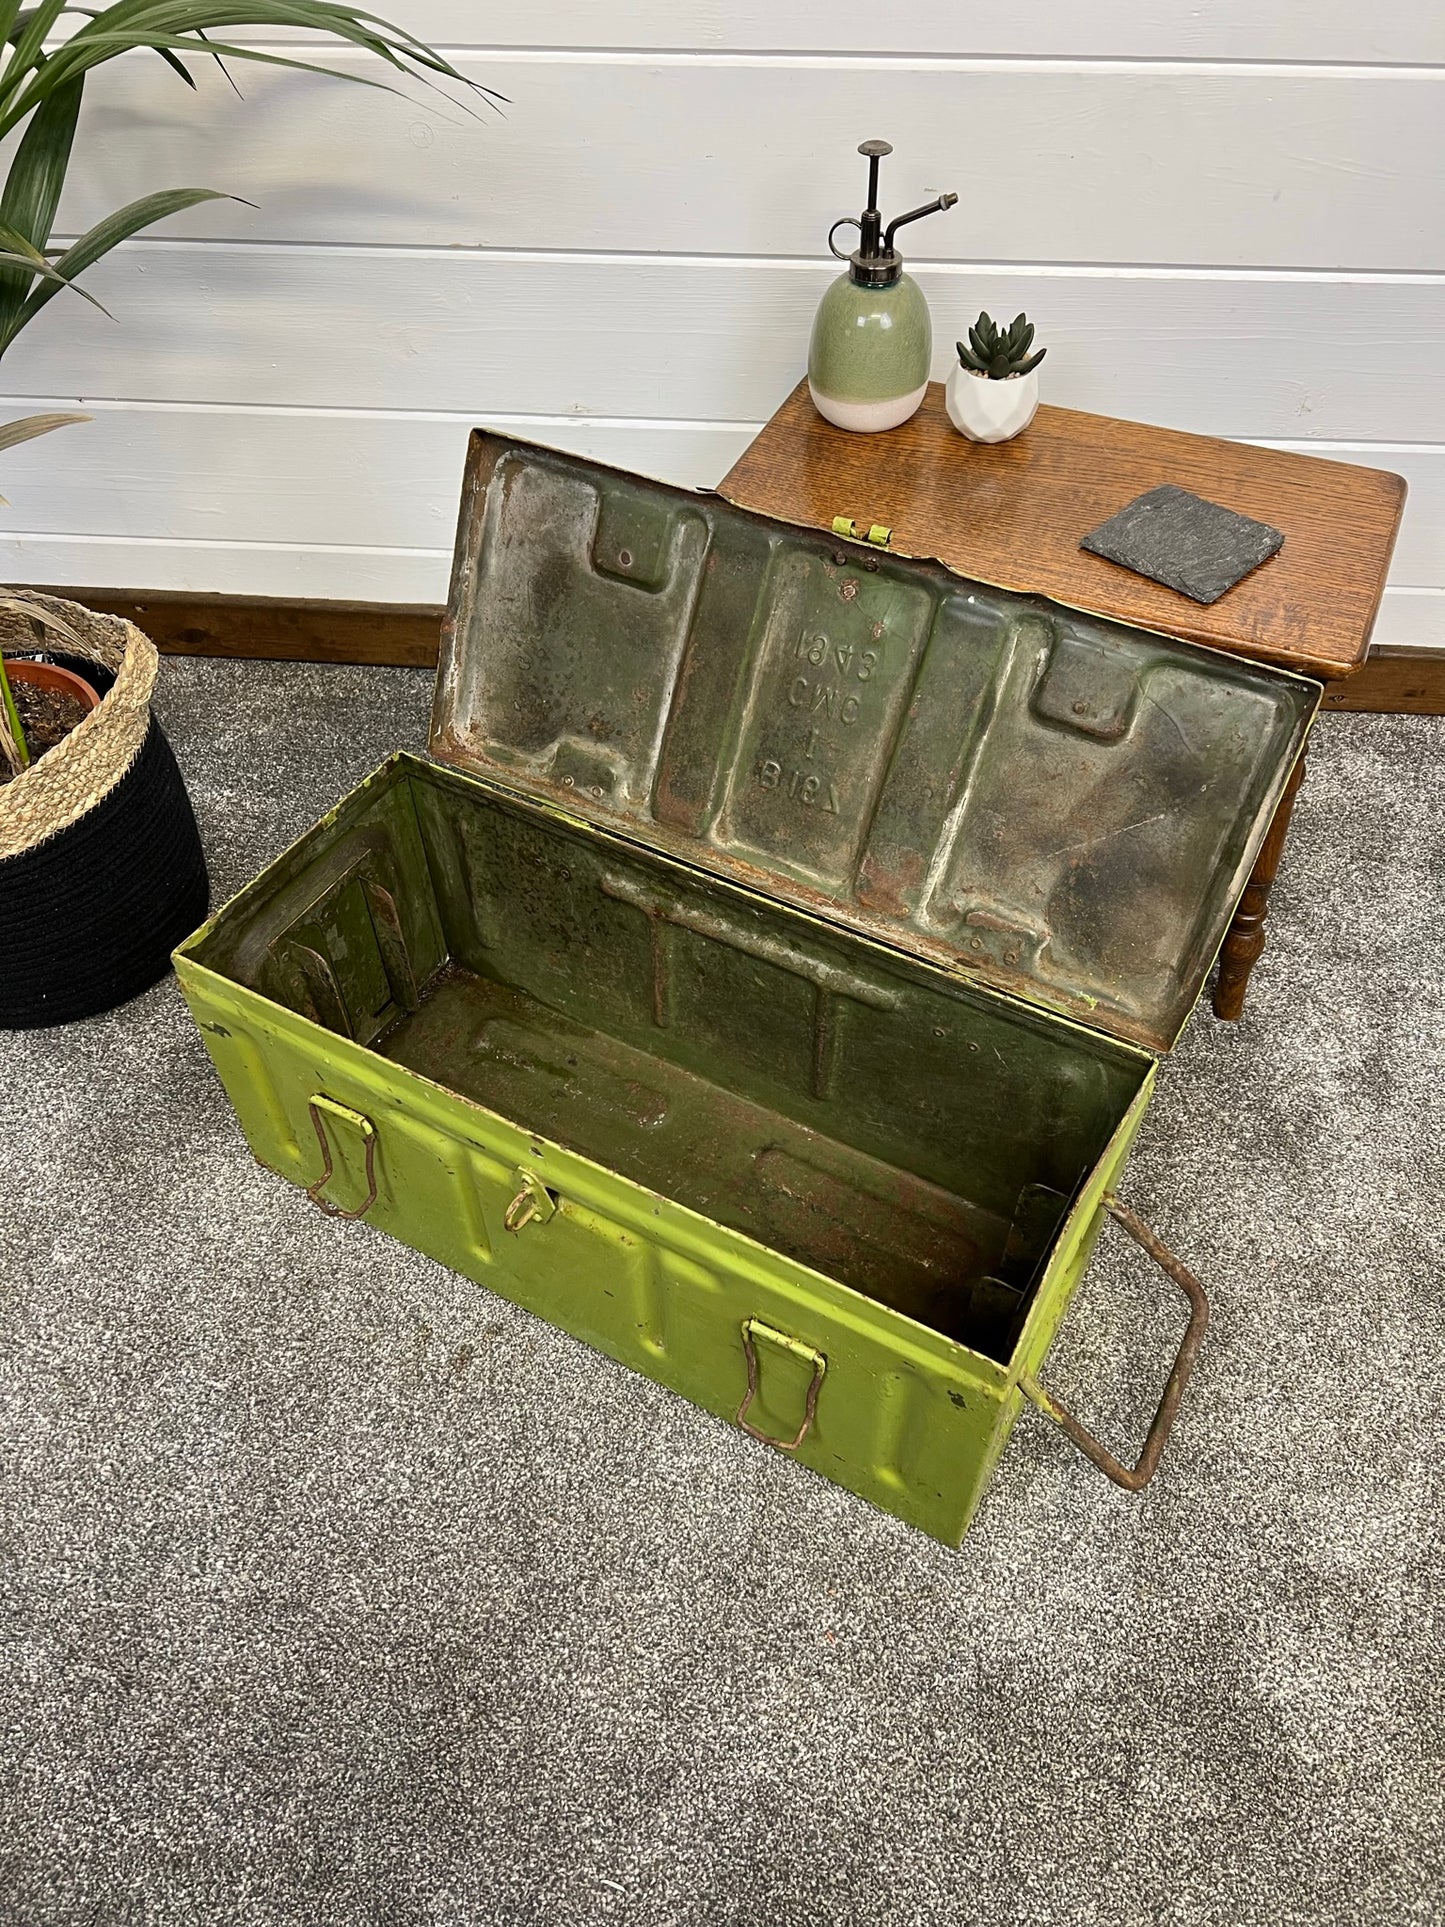 Vintage WW2 Military Metal Ammo Chest 1943 Rustic Industrial Home Storage Art Deco Ammo Box Table